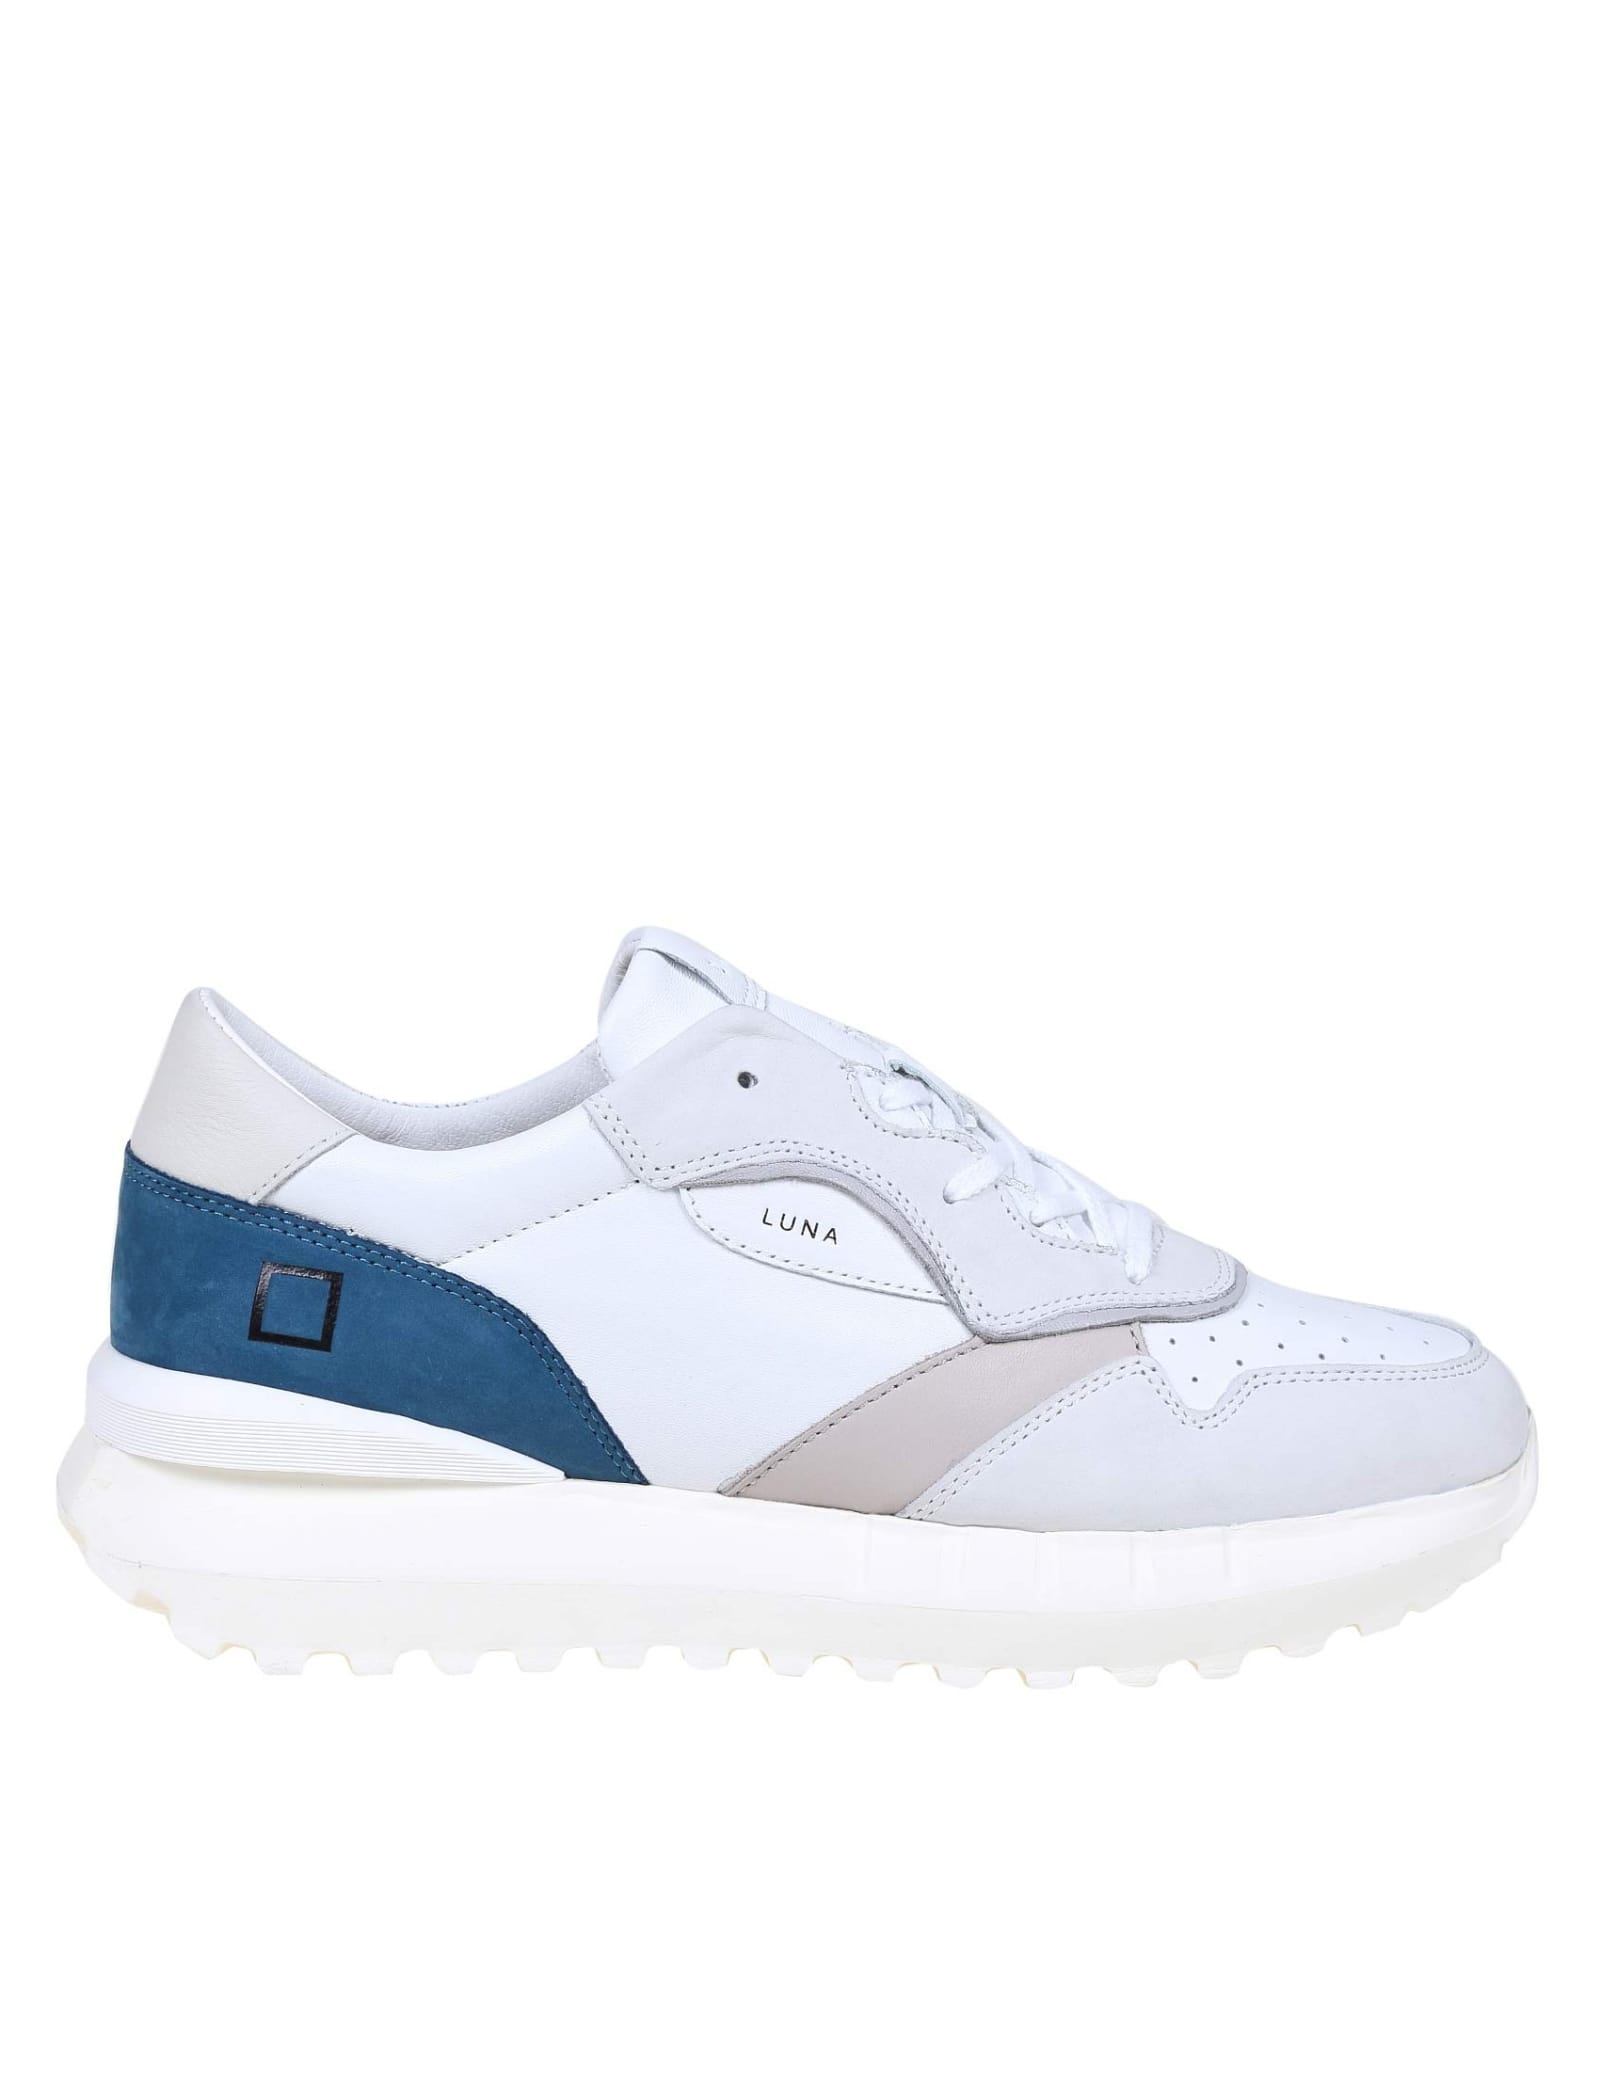 D.A.T.E. White And Blue Leather Sneakers